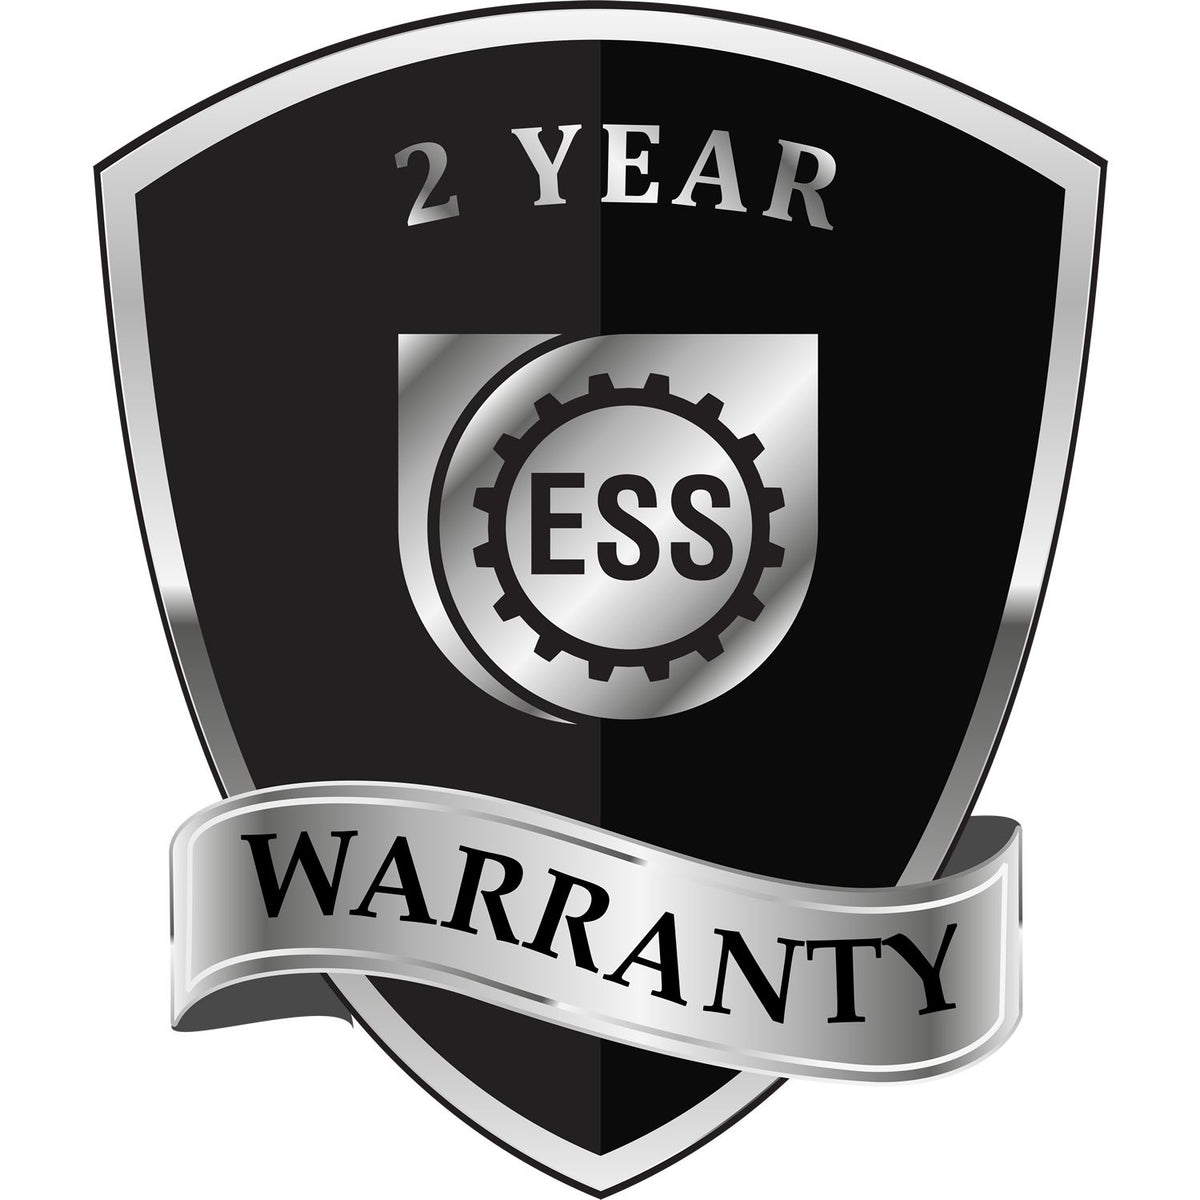 A badge or emblem showing a warranty icon for the Heavy Duty Cast Iron Kansas Land Surveyor Seal Embosser